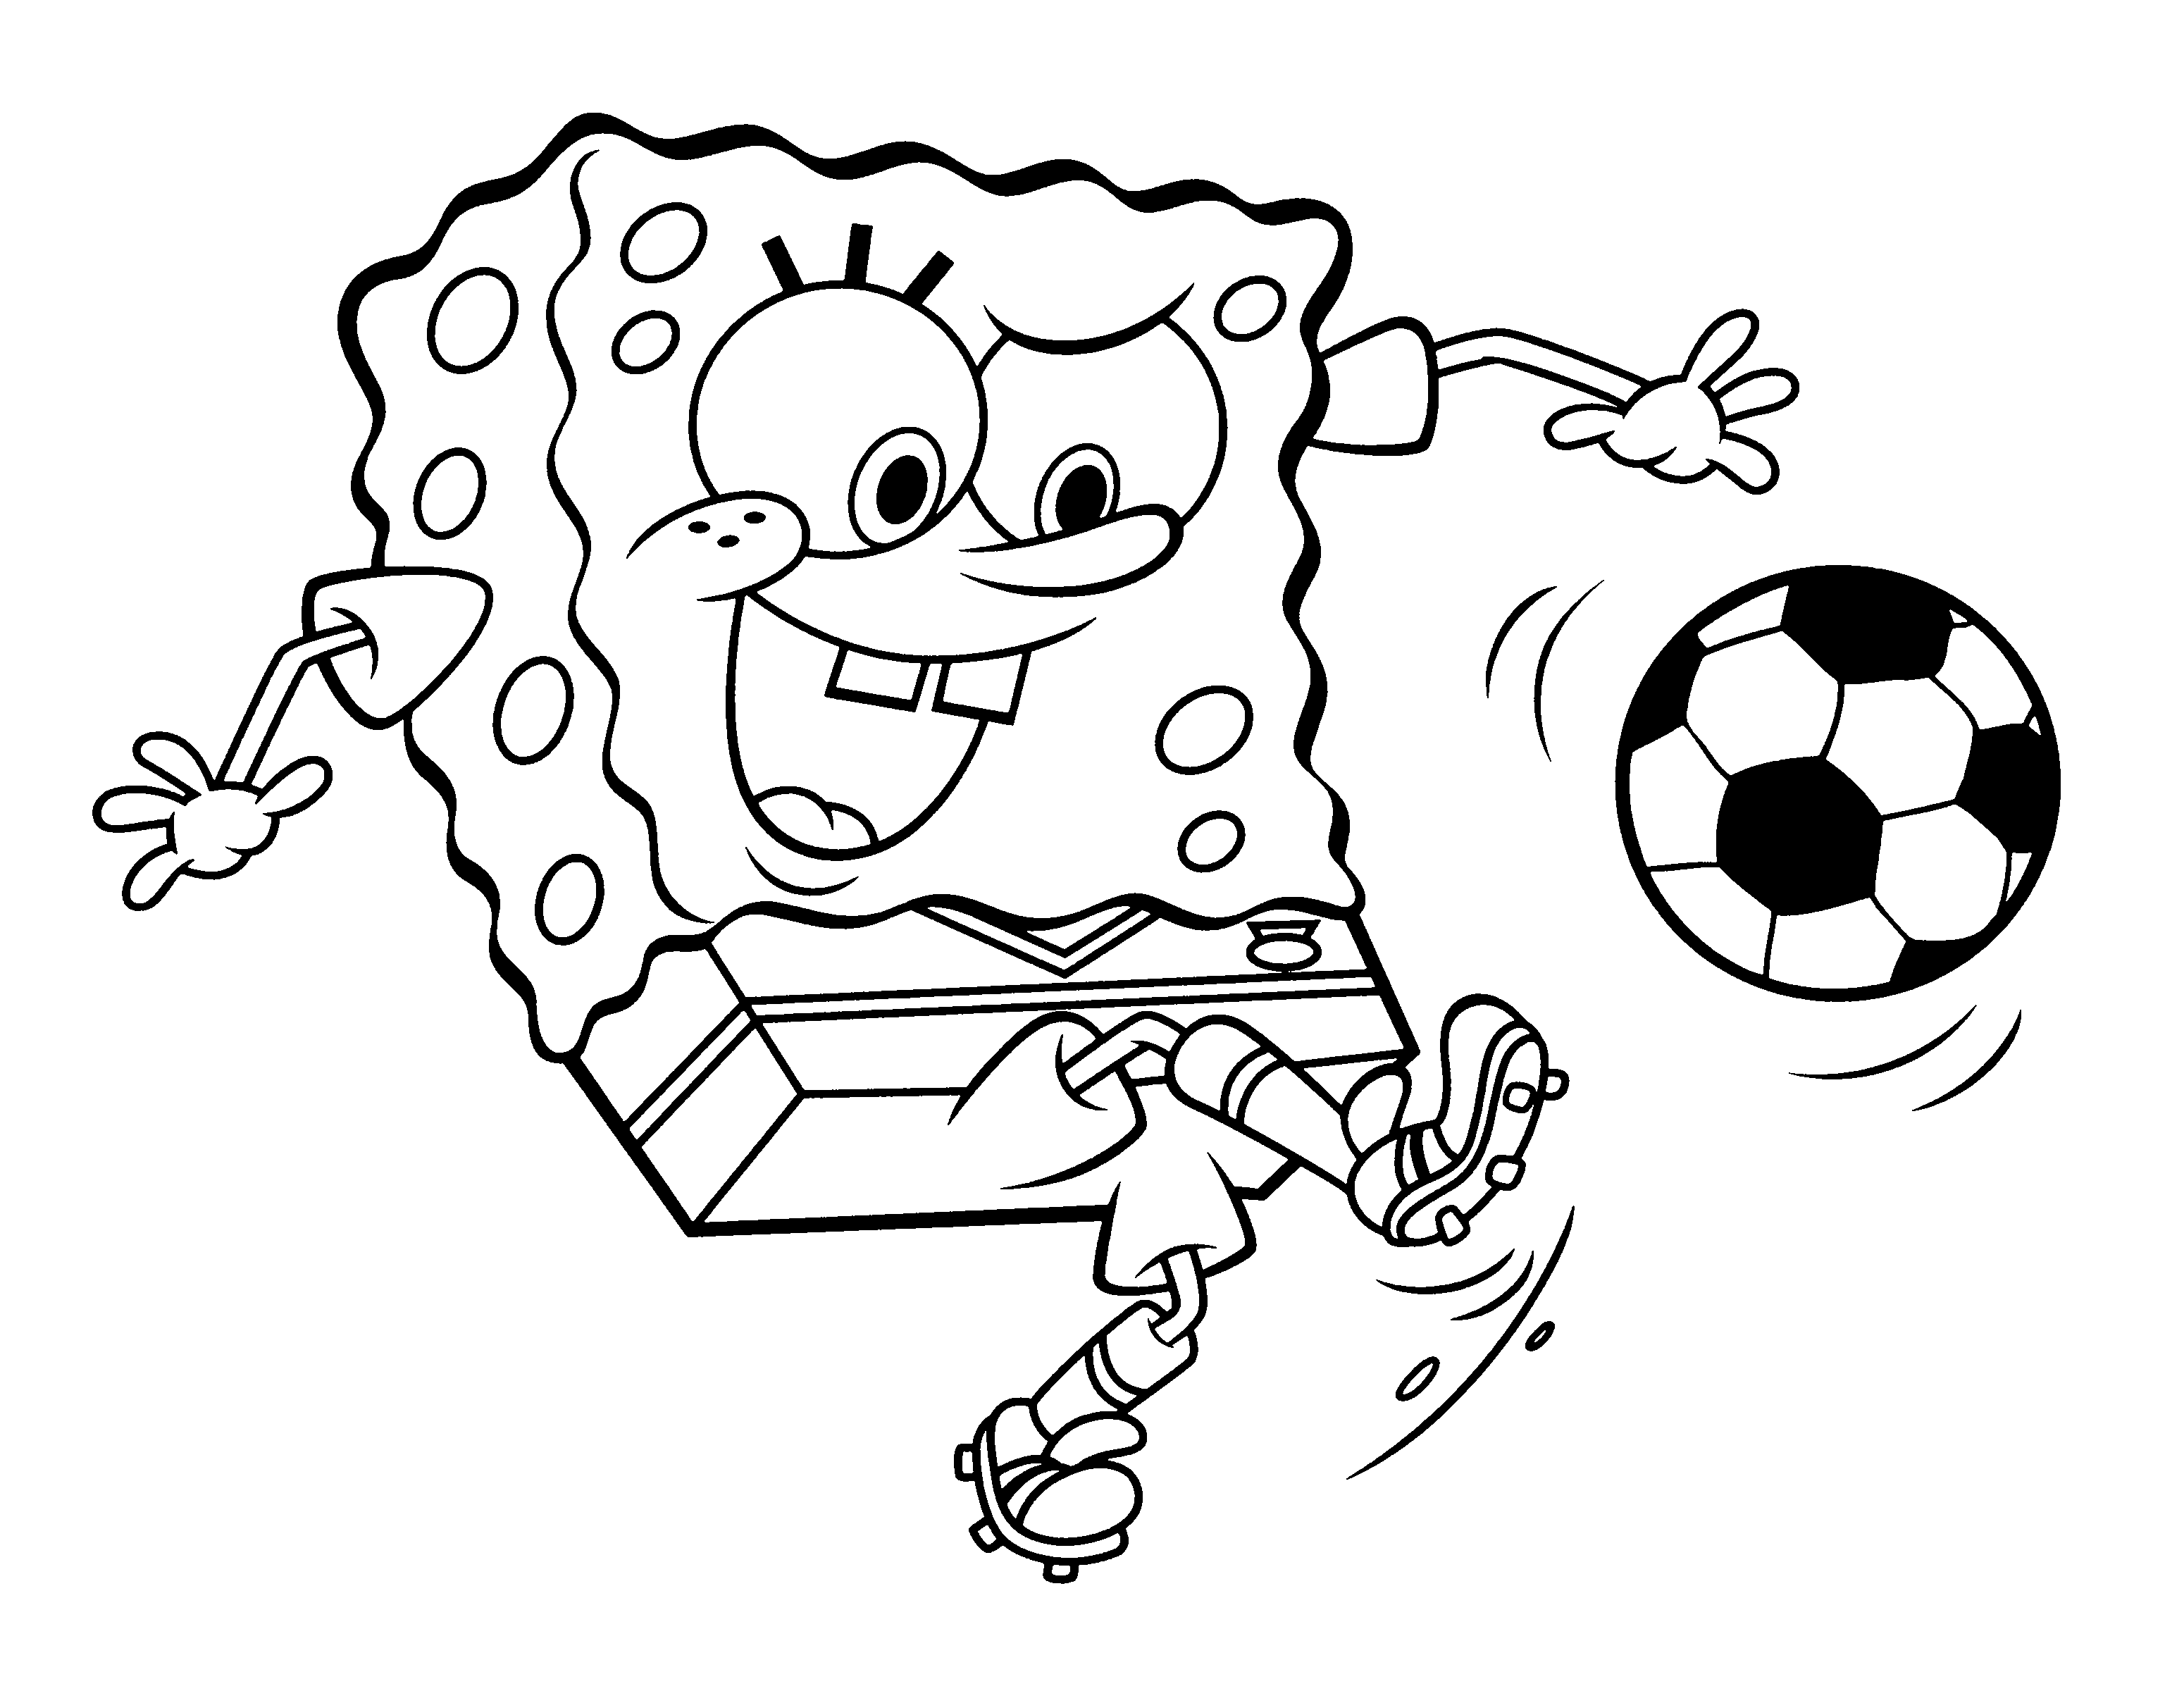 Spongebob Playing Football Coloring Pages For Kids #Sp : Printable ...